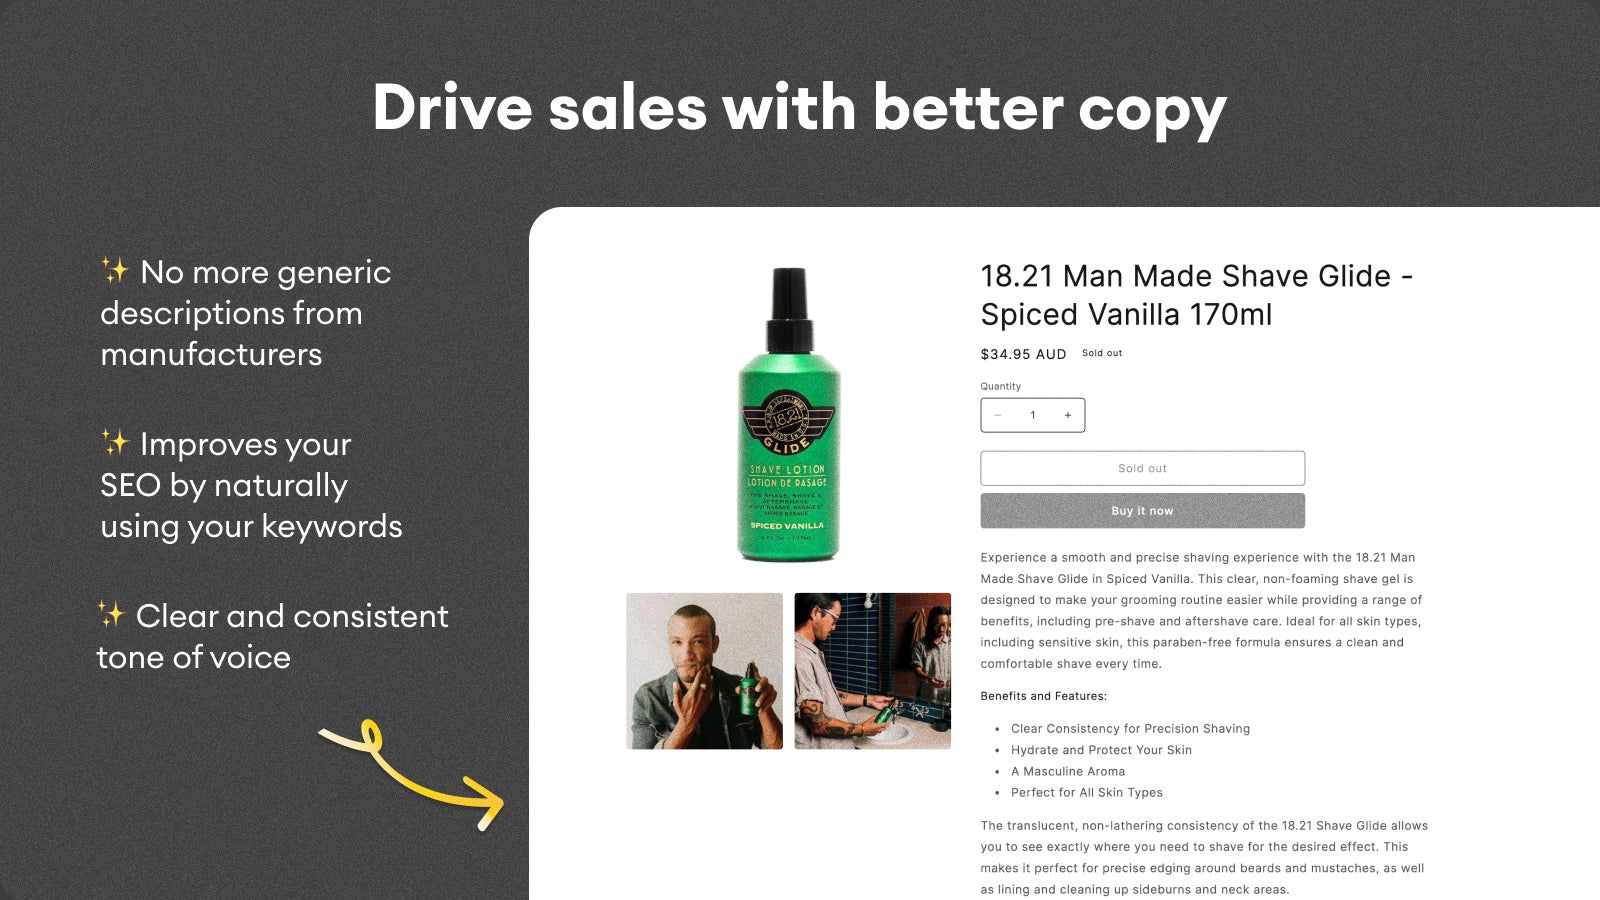 Drive sales with better copy